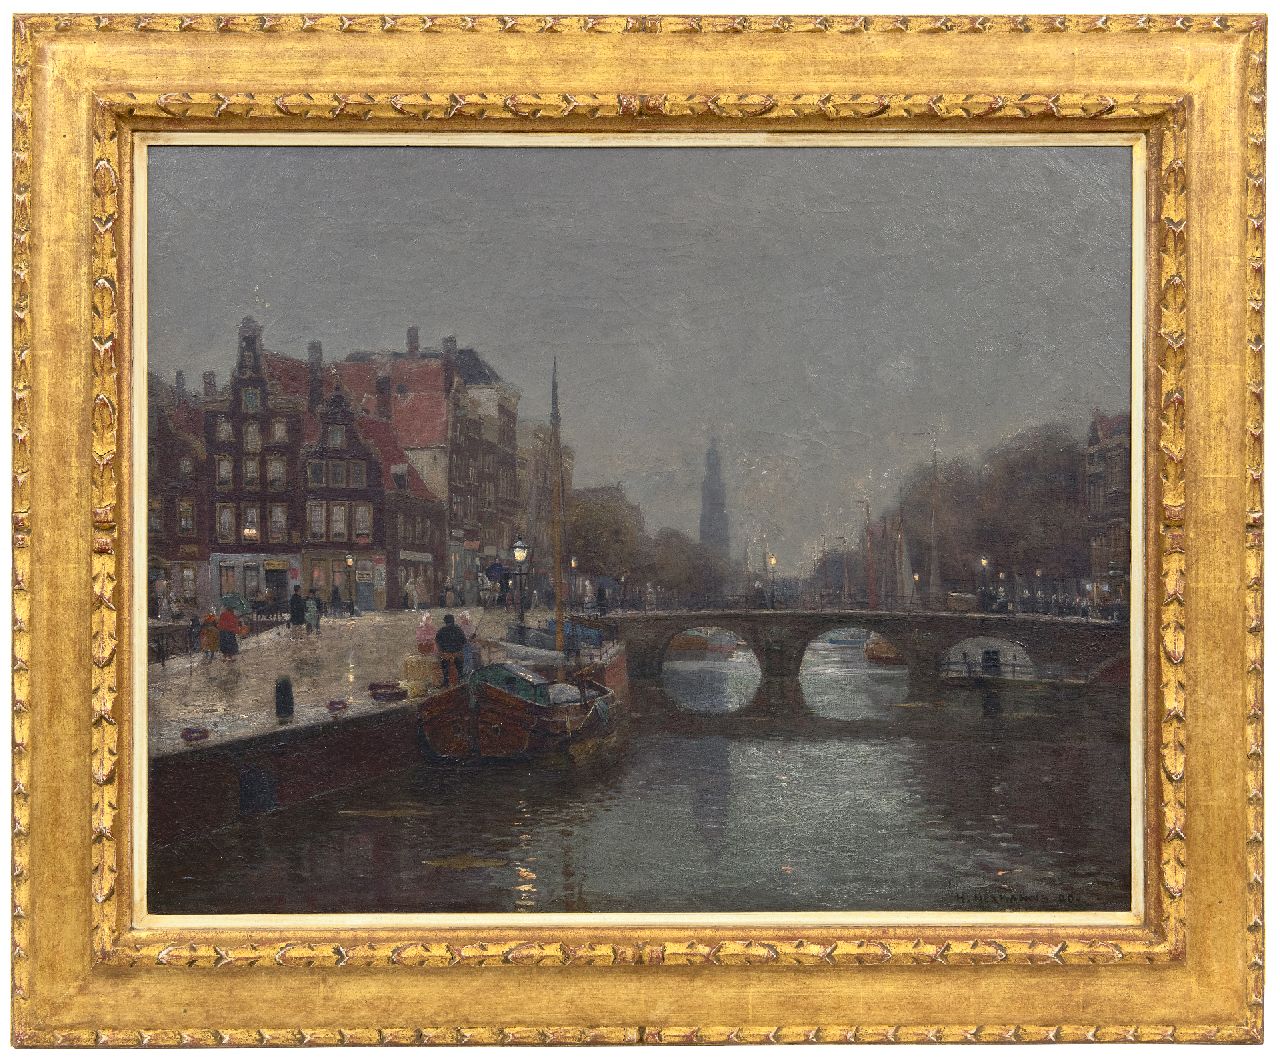 Hermanns H.  | Heinrich Hermanns | Paintings offered for sale | The Prinsengracht in Amsterdam on a rainy day, oil on canvas 55.8 x 70.7 cm, signed l.r. and dated '90